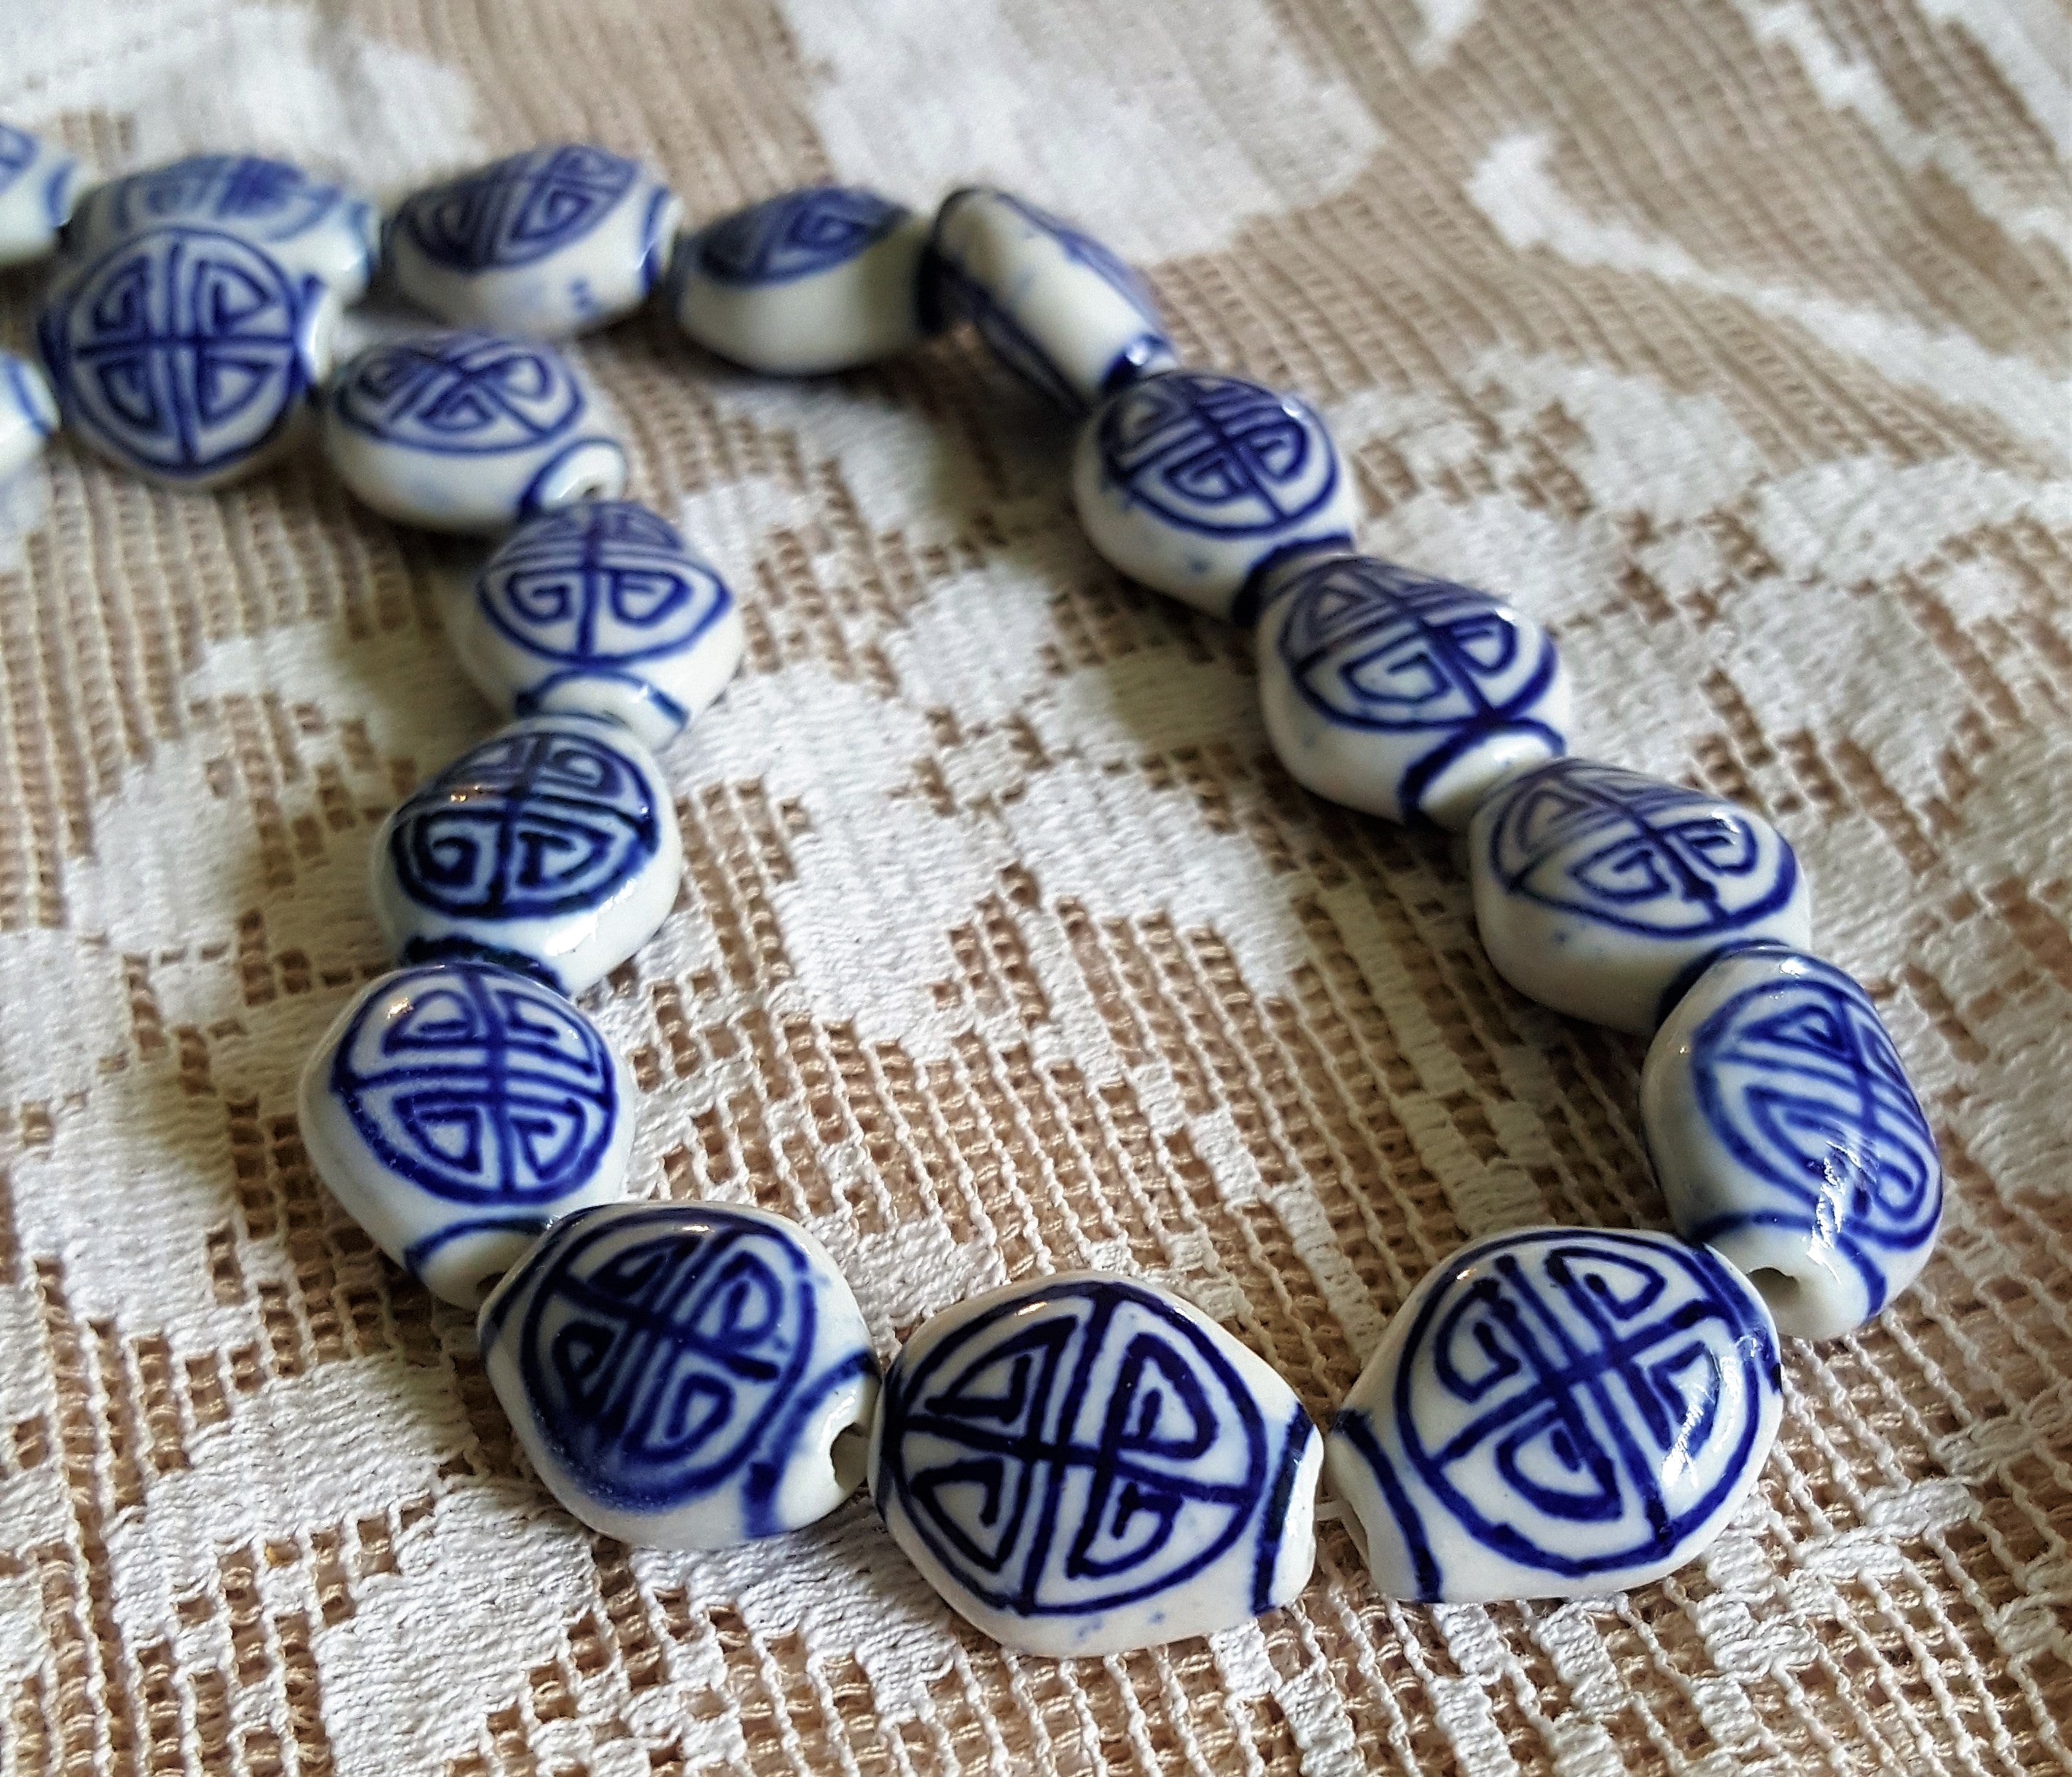 Hand painted navy blue and white beads Porcelain with Asian good luck sign 24 beads Cushion Shape